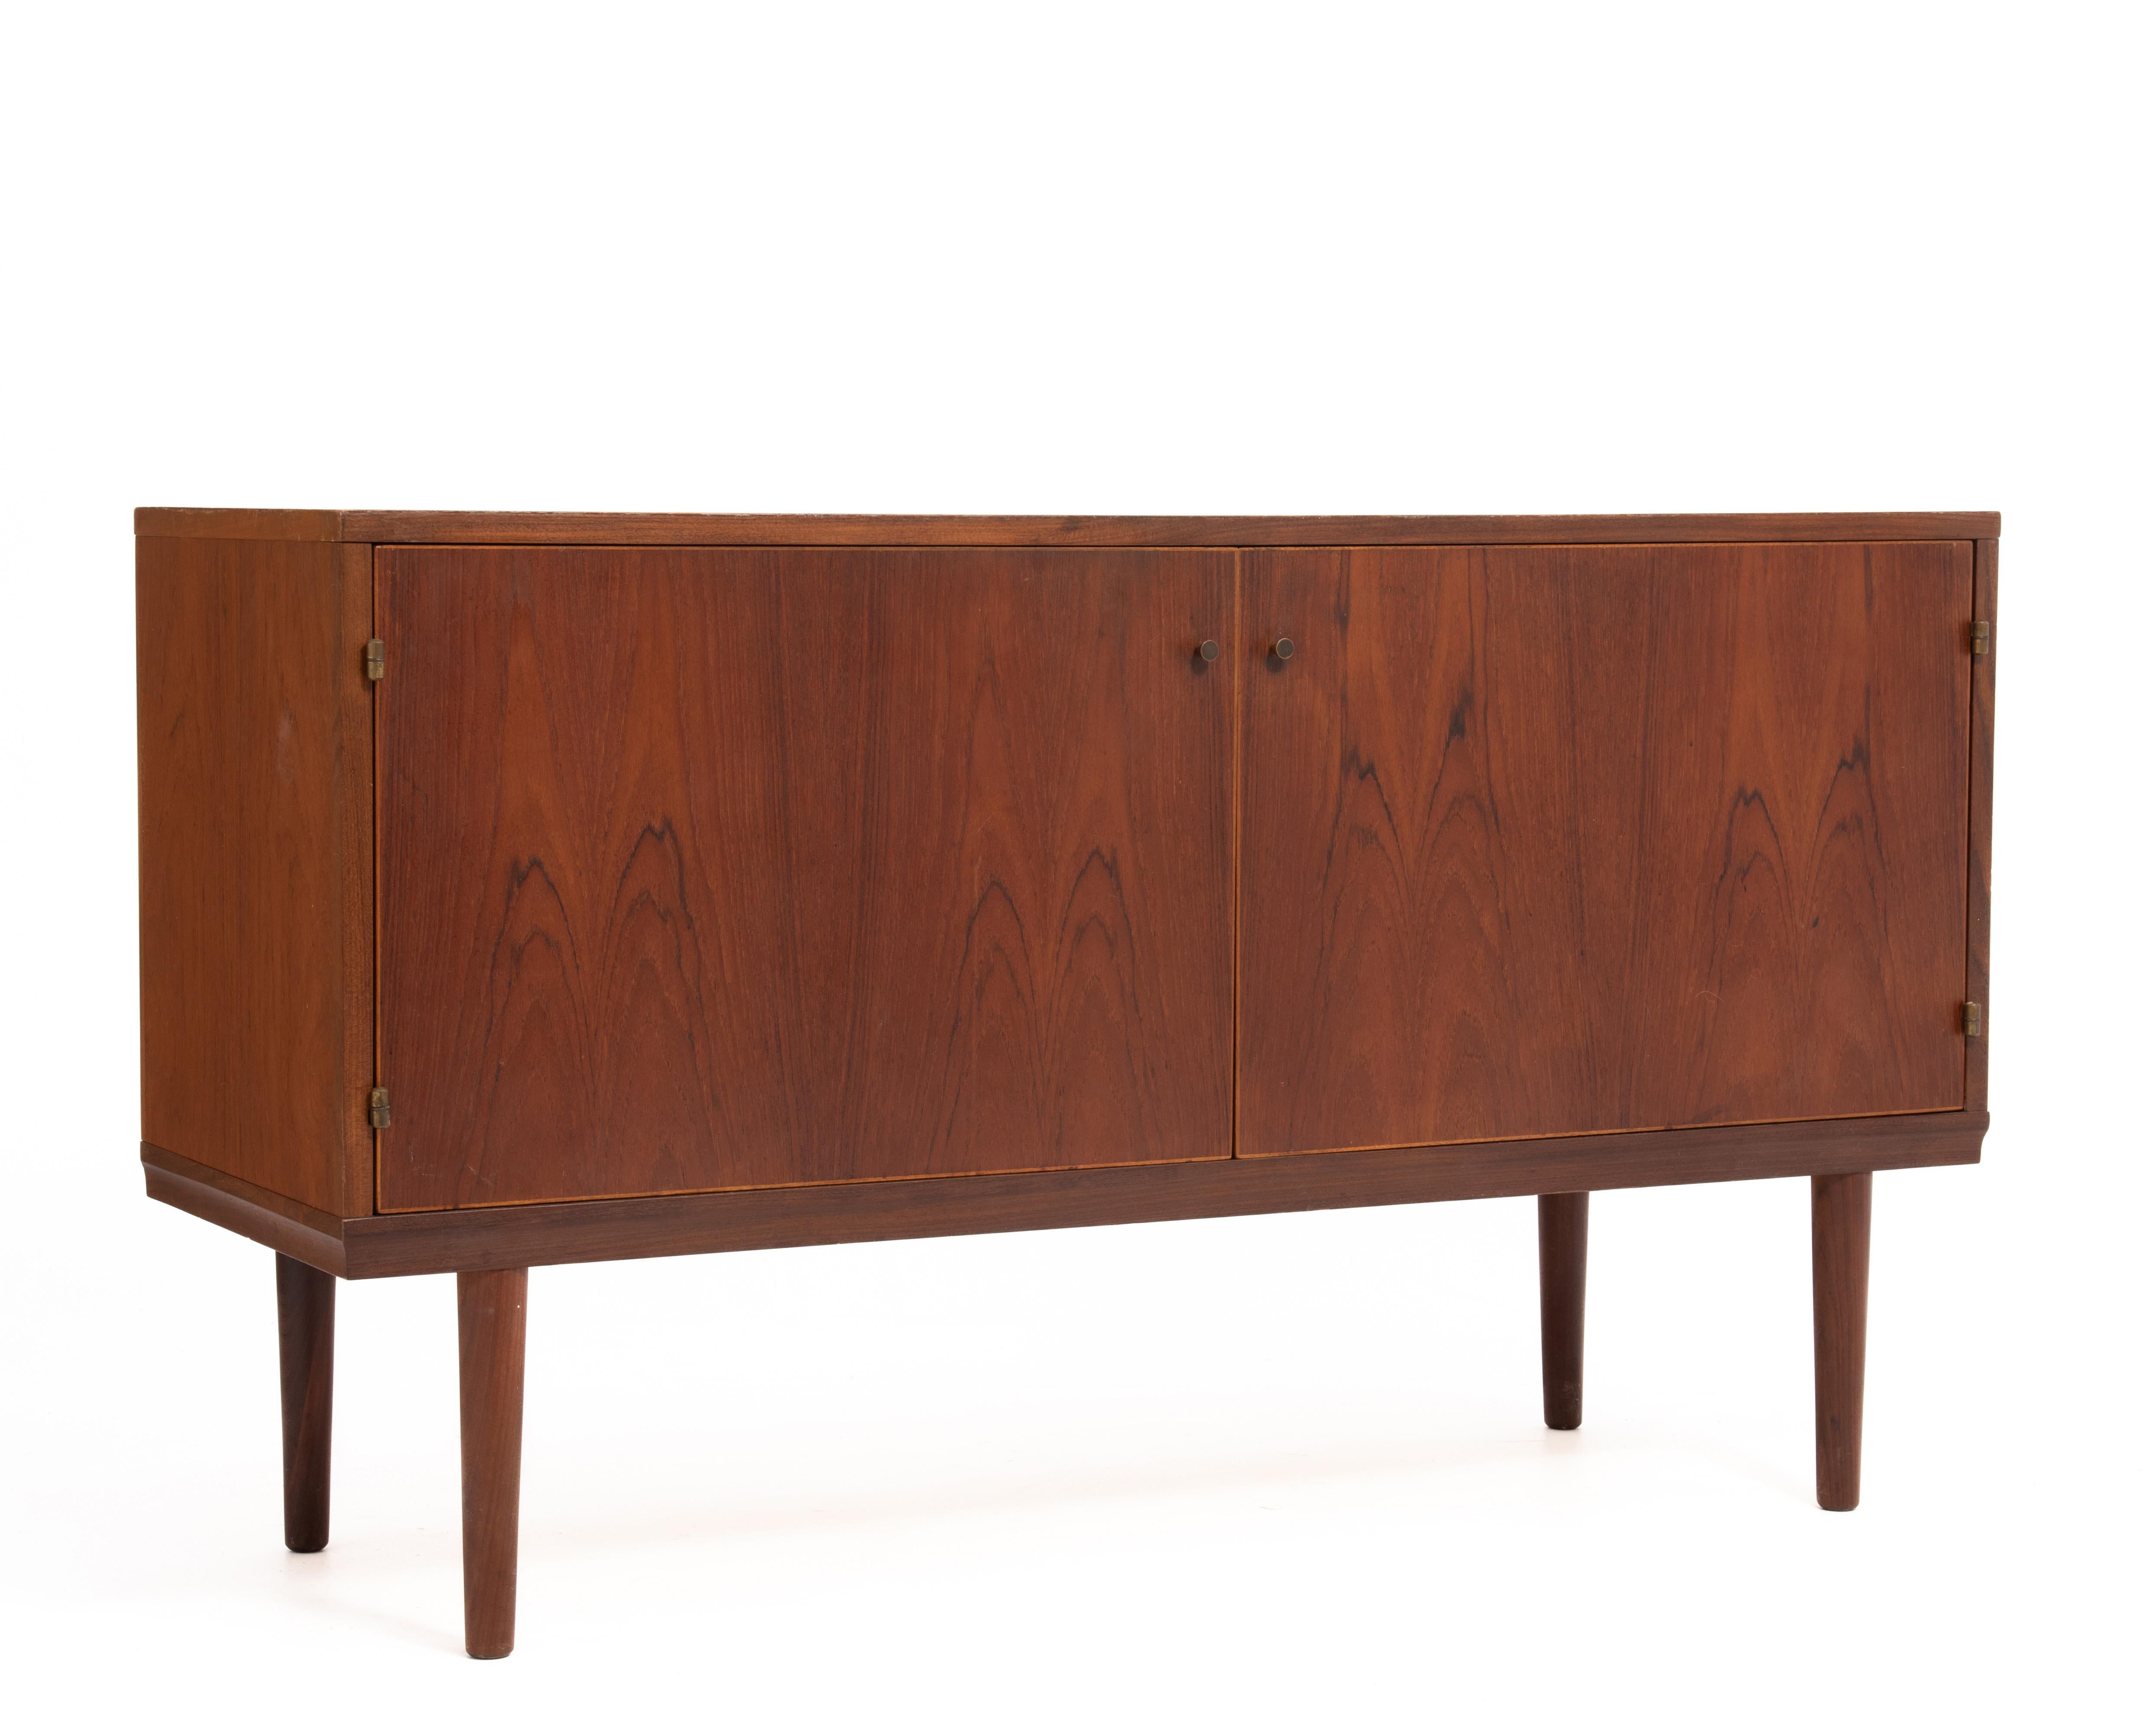 Hans Olsen Danish Teak Credenza 1960s In Good Condition For Sale In Forest Grove, PA